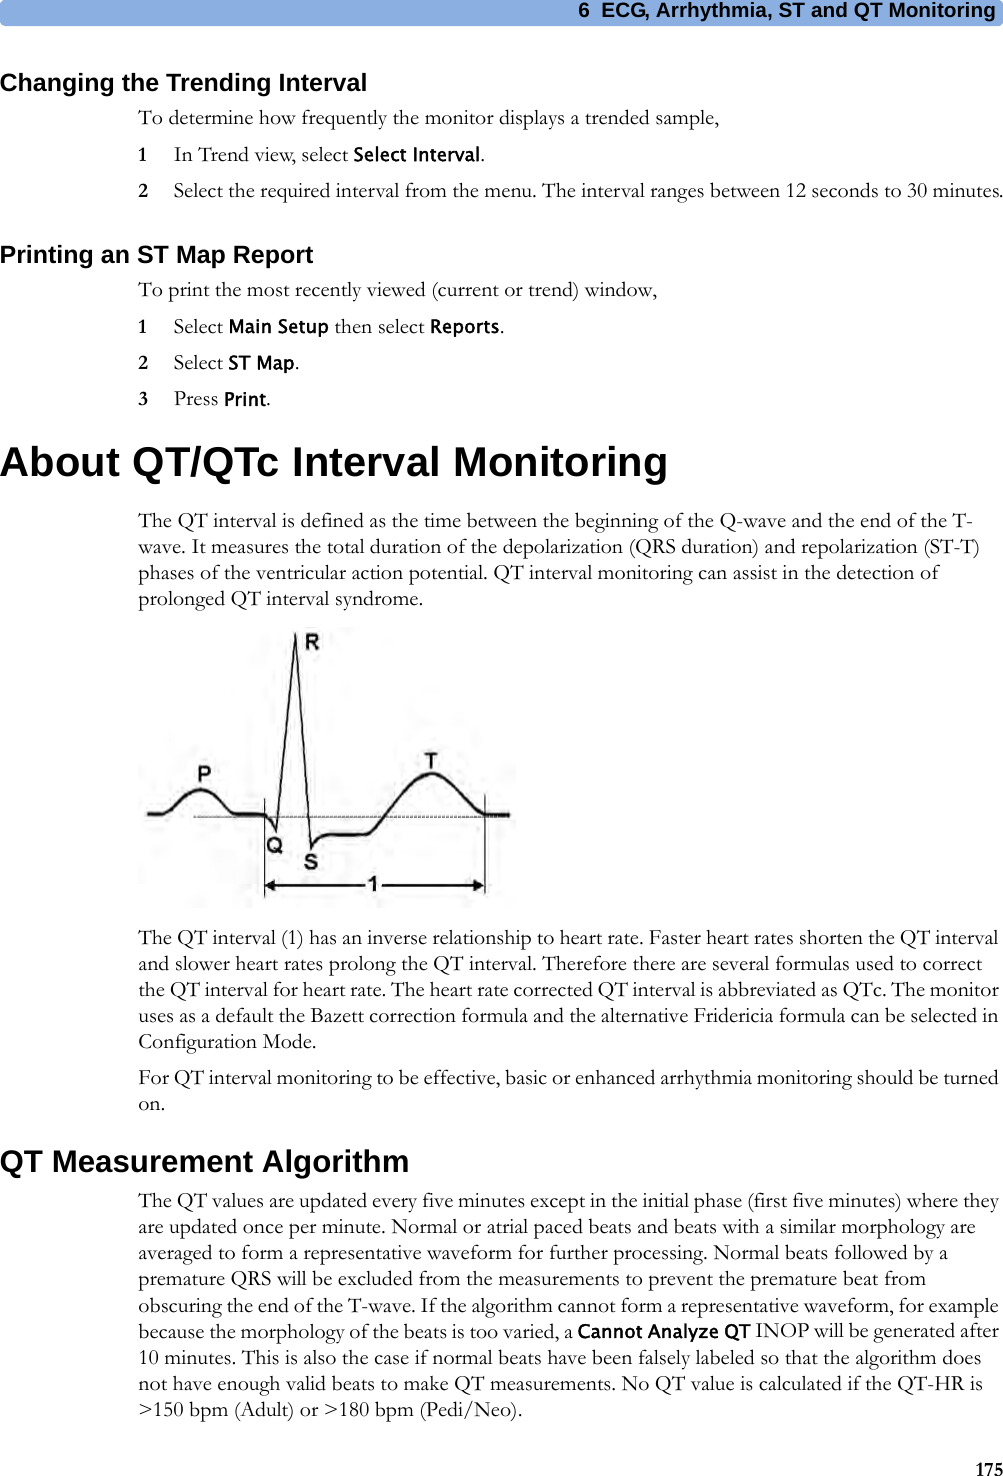 6 ECG, Arrhythmia, ST and QT Monitoring175Changing the Trending IntervalTo determine how frequently the monitor displays a trended sample,1In Trend view, select Select Interval.2Select the required interval from the menu. The interval ranges between 12 seconds to 30 minutes.Printing an ST Map ReportTo print the most recently viewed (current or trend) window,1Select Main Setup then select Reports.2Select ST Map.3Press Print.About QT/QTc Interval MonitoringThe QT interval is defined as the time between the beginning of the Q-wave and the end of the T-wave. It measures the total duration of the depolarization (QRS duration) and repolarization (ST-T) phases of the ventricular action potential. QT interval monitoring can assist in the detection of prolonged QT interval syndrome.The QT interval (1) has an inverse relationship to heart rate. Faster heart rates shorten the QT interval and slower heart rates prolong the QT interval. Therefore there are several formulas used to correct the QT interval for heart rate. The heart rate corrected QT interval is abbreviated as QTc. The monitor uses as a default the Bazett correction formula and the alternative Fridericia formula can be selected in Configuration Mode.For QT interval monitoring to be effective, basic or enhanced arrhythmia monitoring should be turned on.QT Measurement AlgorithmThe QT values are updated every five minutes except in the initial phase (first five minutes) where they are updated once per minute. Normal or atrial paced beats and beats with a similar morphology are averaged to form a representative waveform for further processing. Normal beats followed by a premature QRS will be excluded from the measurements to prevent the premature beat from obscuring the end of the T-wave. If the algorithm cannot form a representative waveform, for example because the morphology of the beats is too varied, a Cannot Analyze QT INOP will be generated after 10 minutes. This is also the case if normal beats have been falsely labeled so that the algorithm does not have enough valid beats to make QT measurements. No QT value is calculated if the QT-HR is &gt;150 bpm (Adult) or &gt;180 bpm (Pedi/Neo).